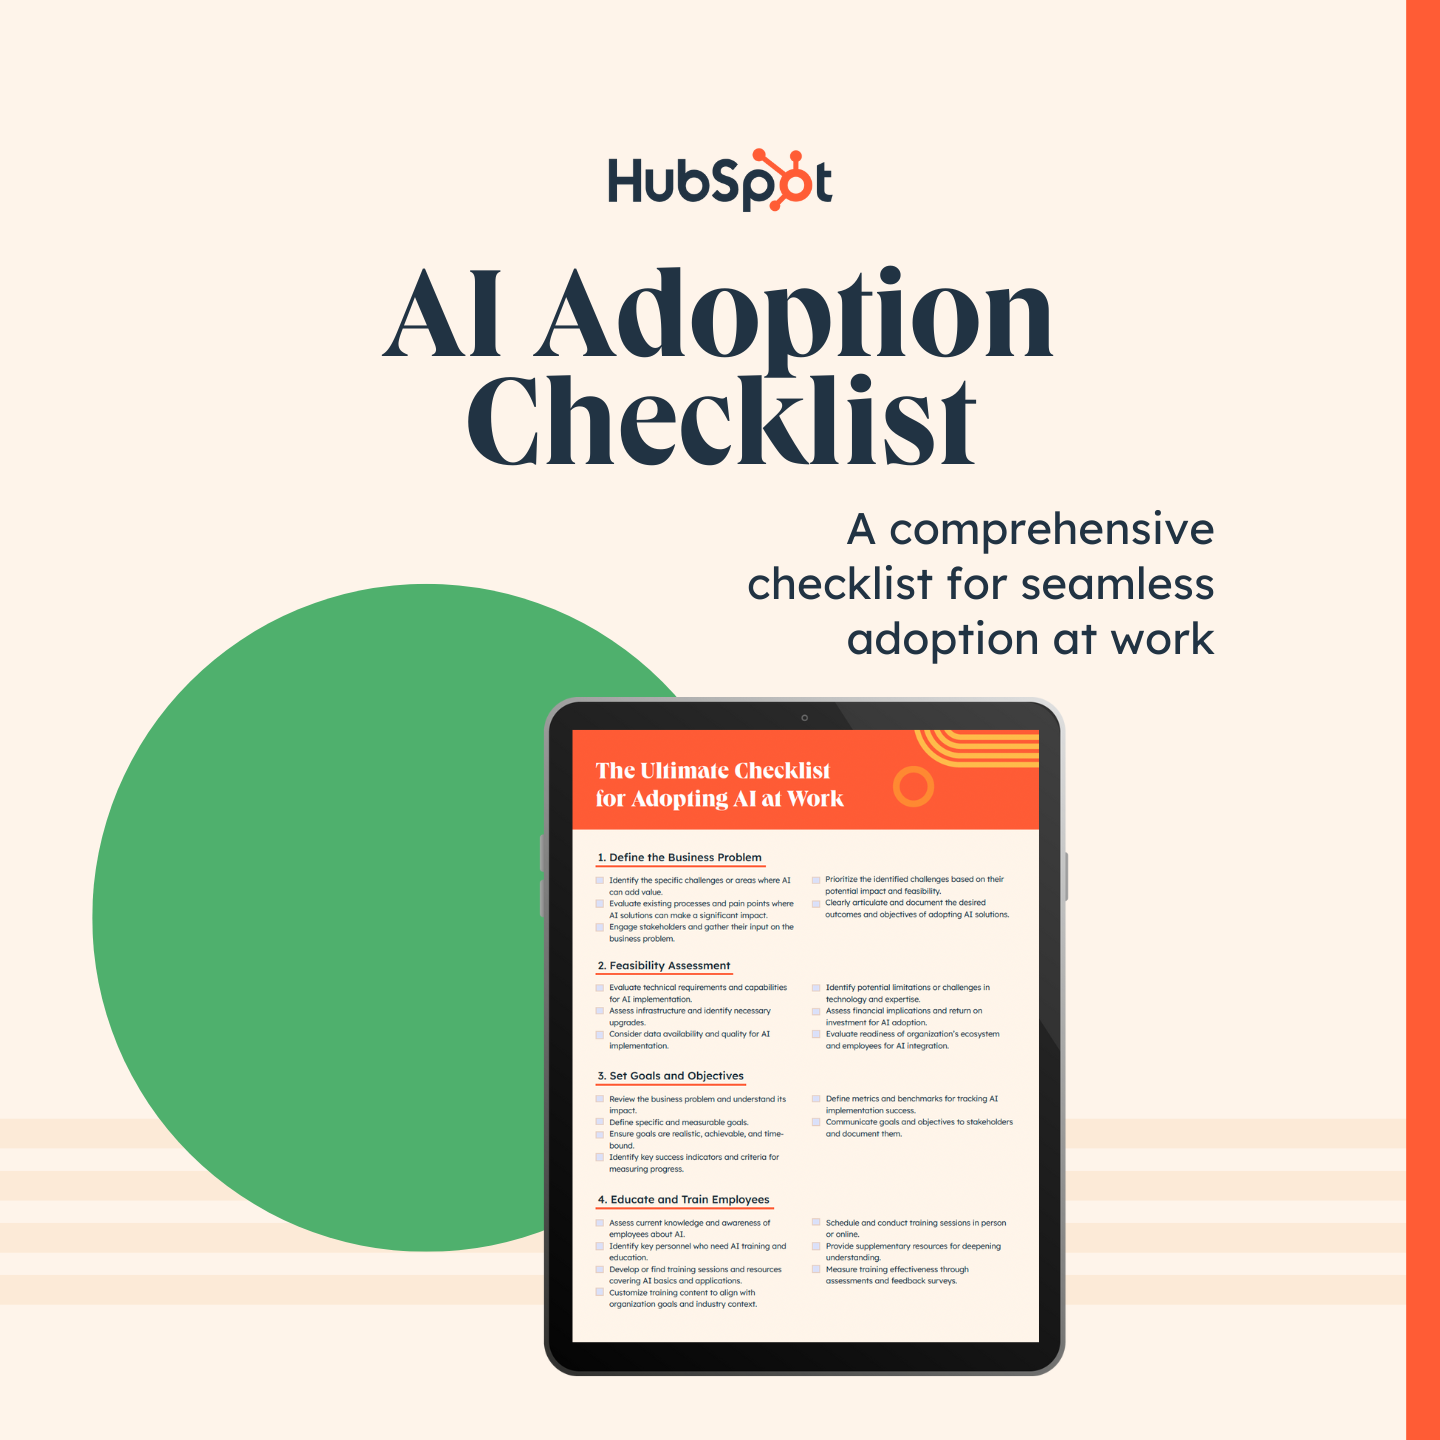 The Ultimate Checklist for Adopting AI at Work